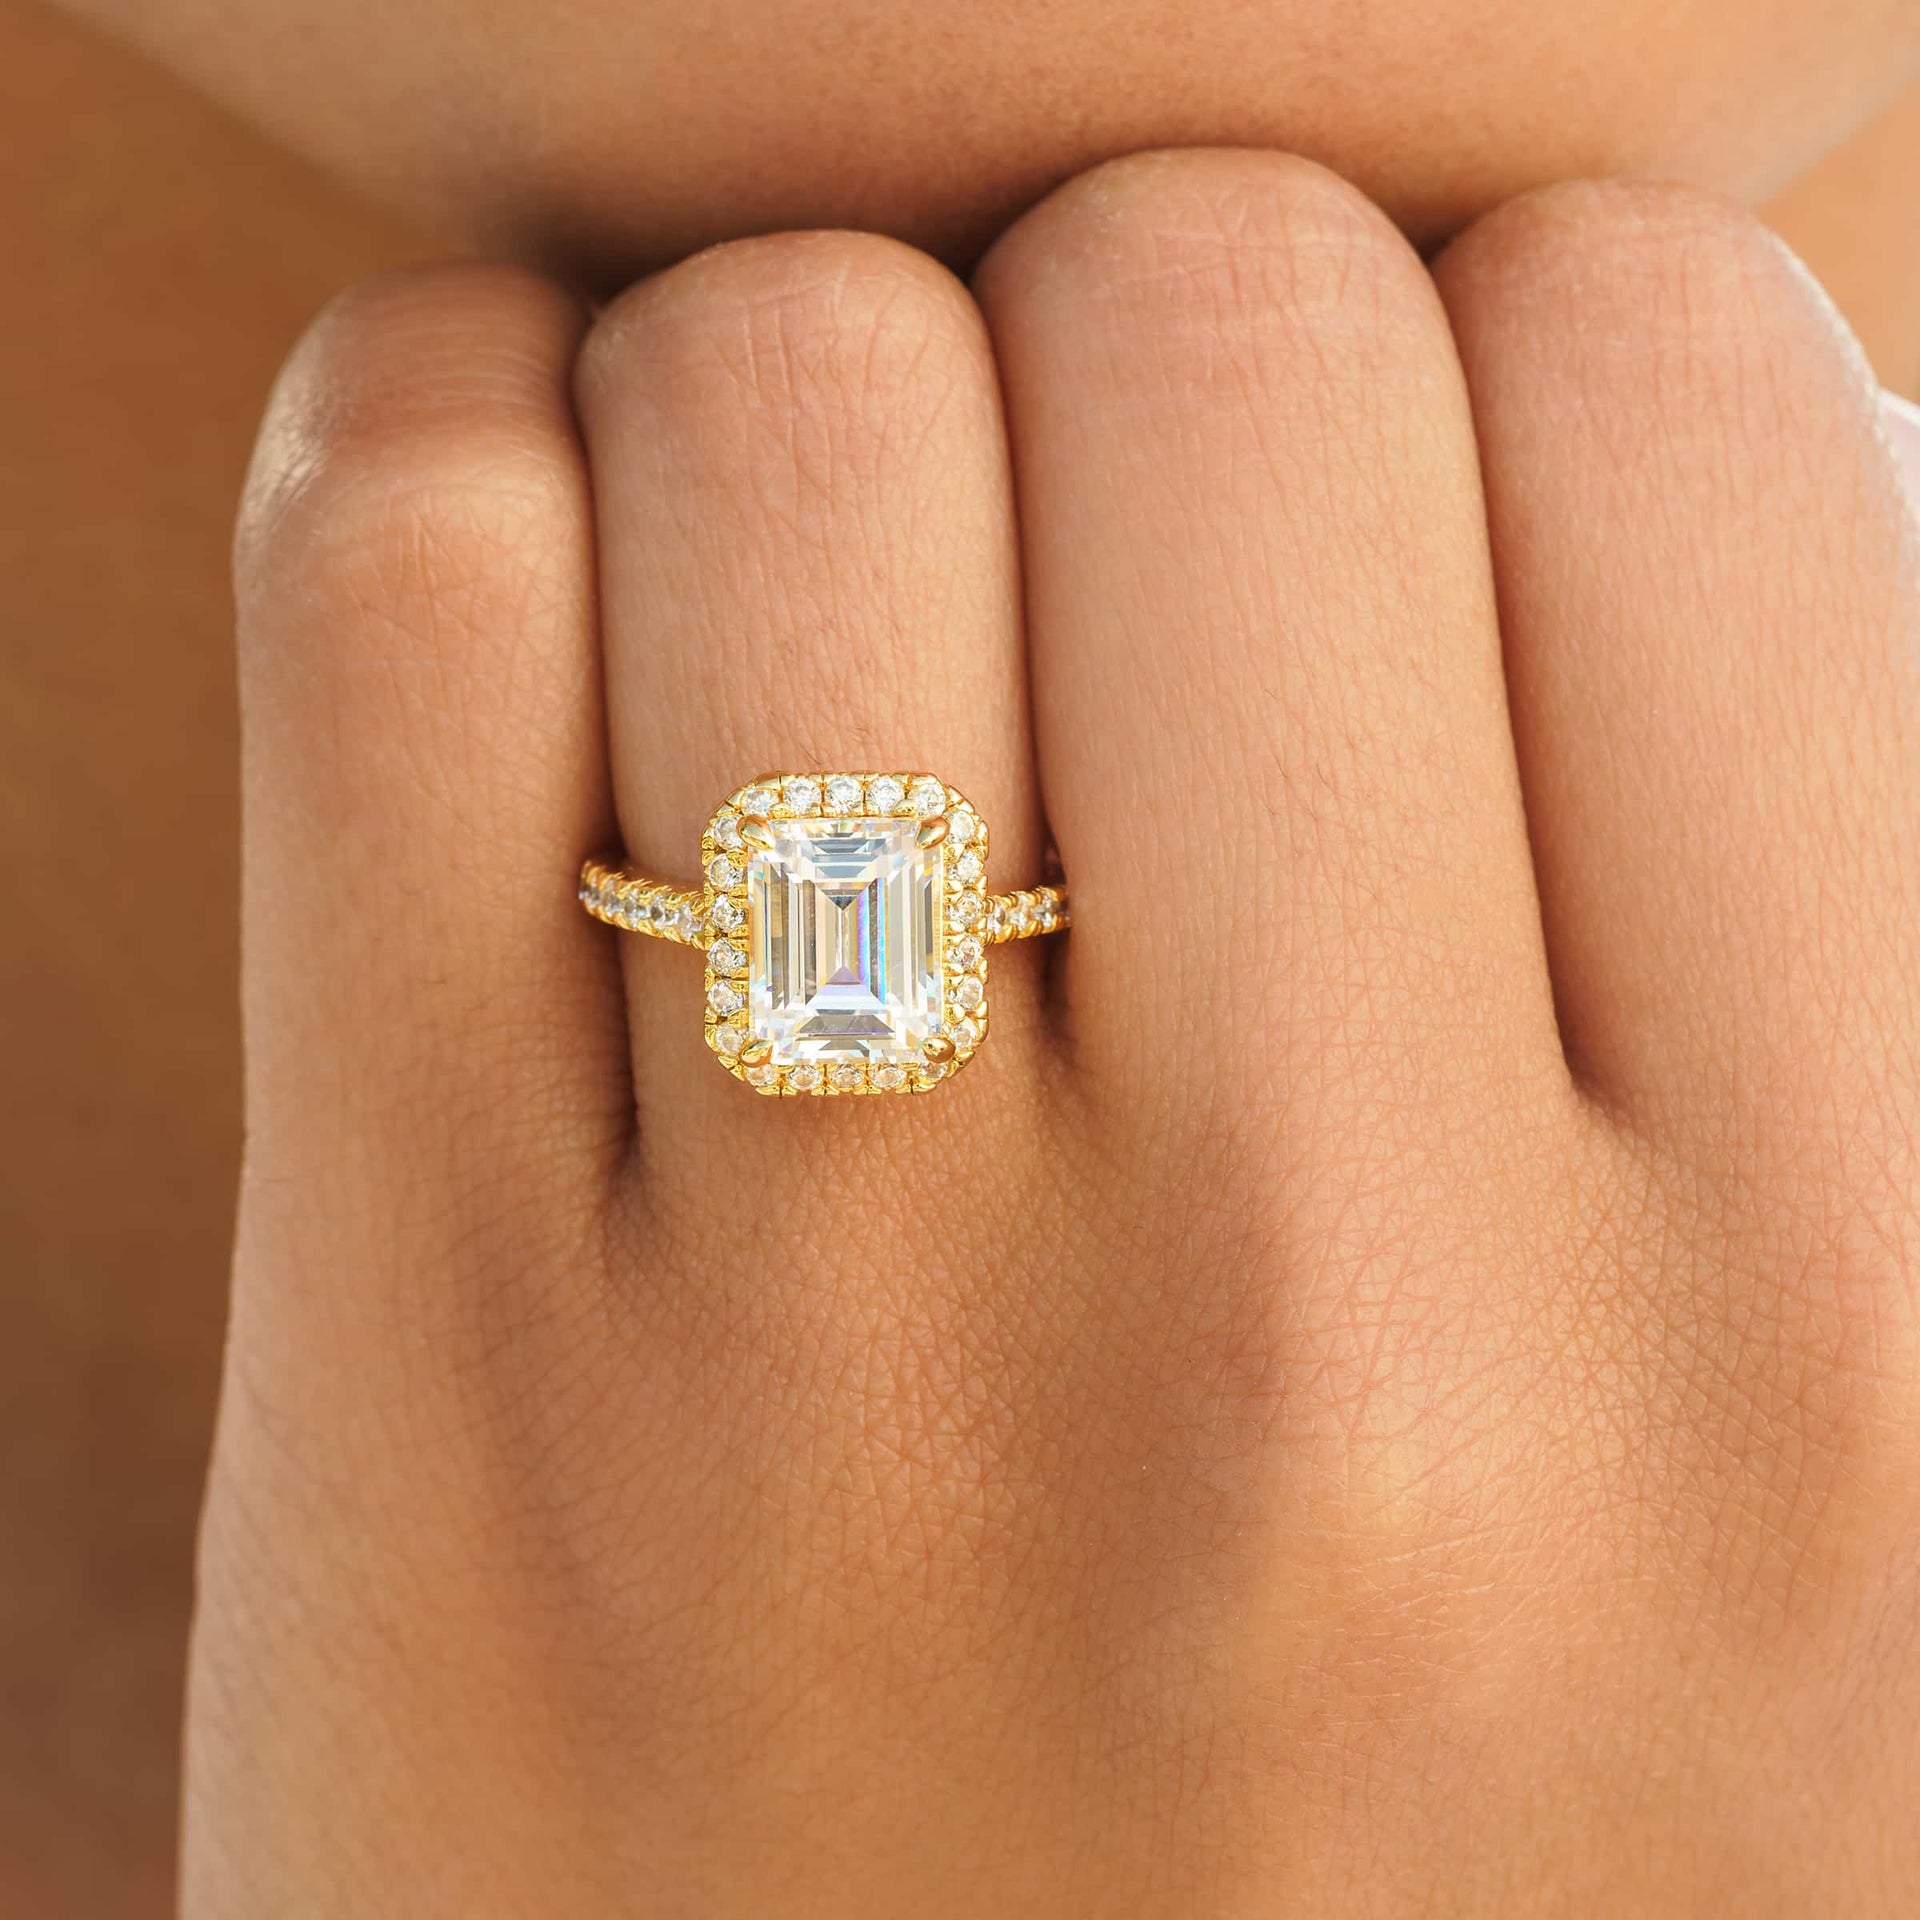 Gorgeous gold emerald cut engagement ring with halo and half eternity band detailing on female hand